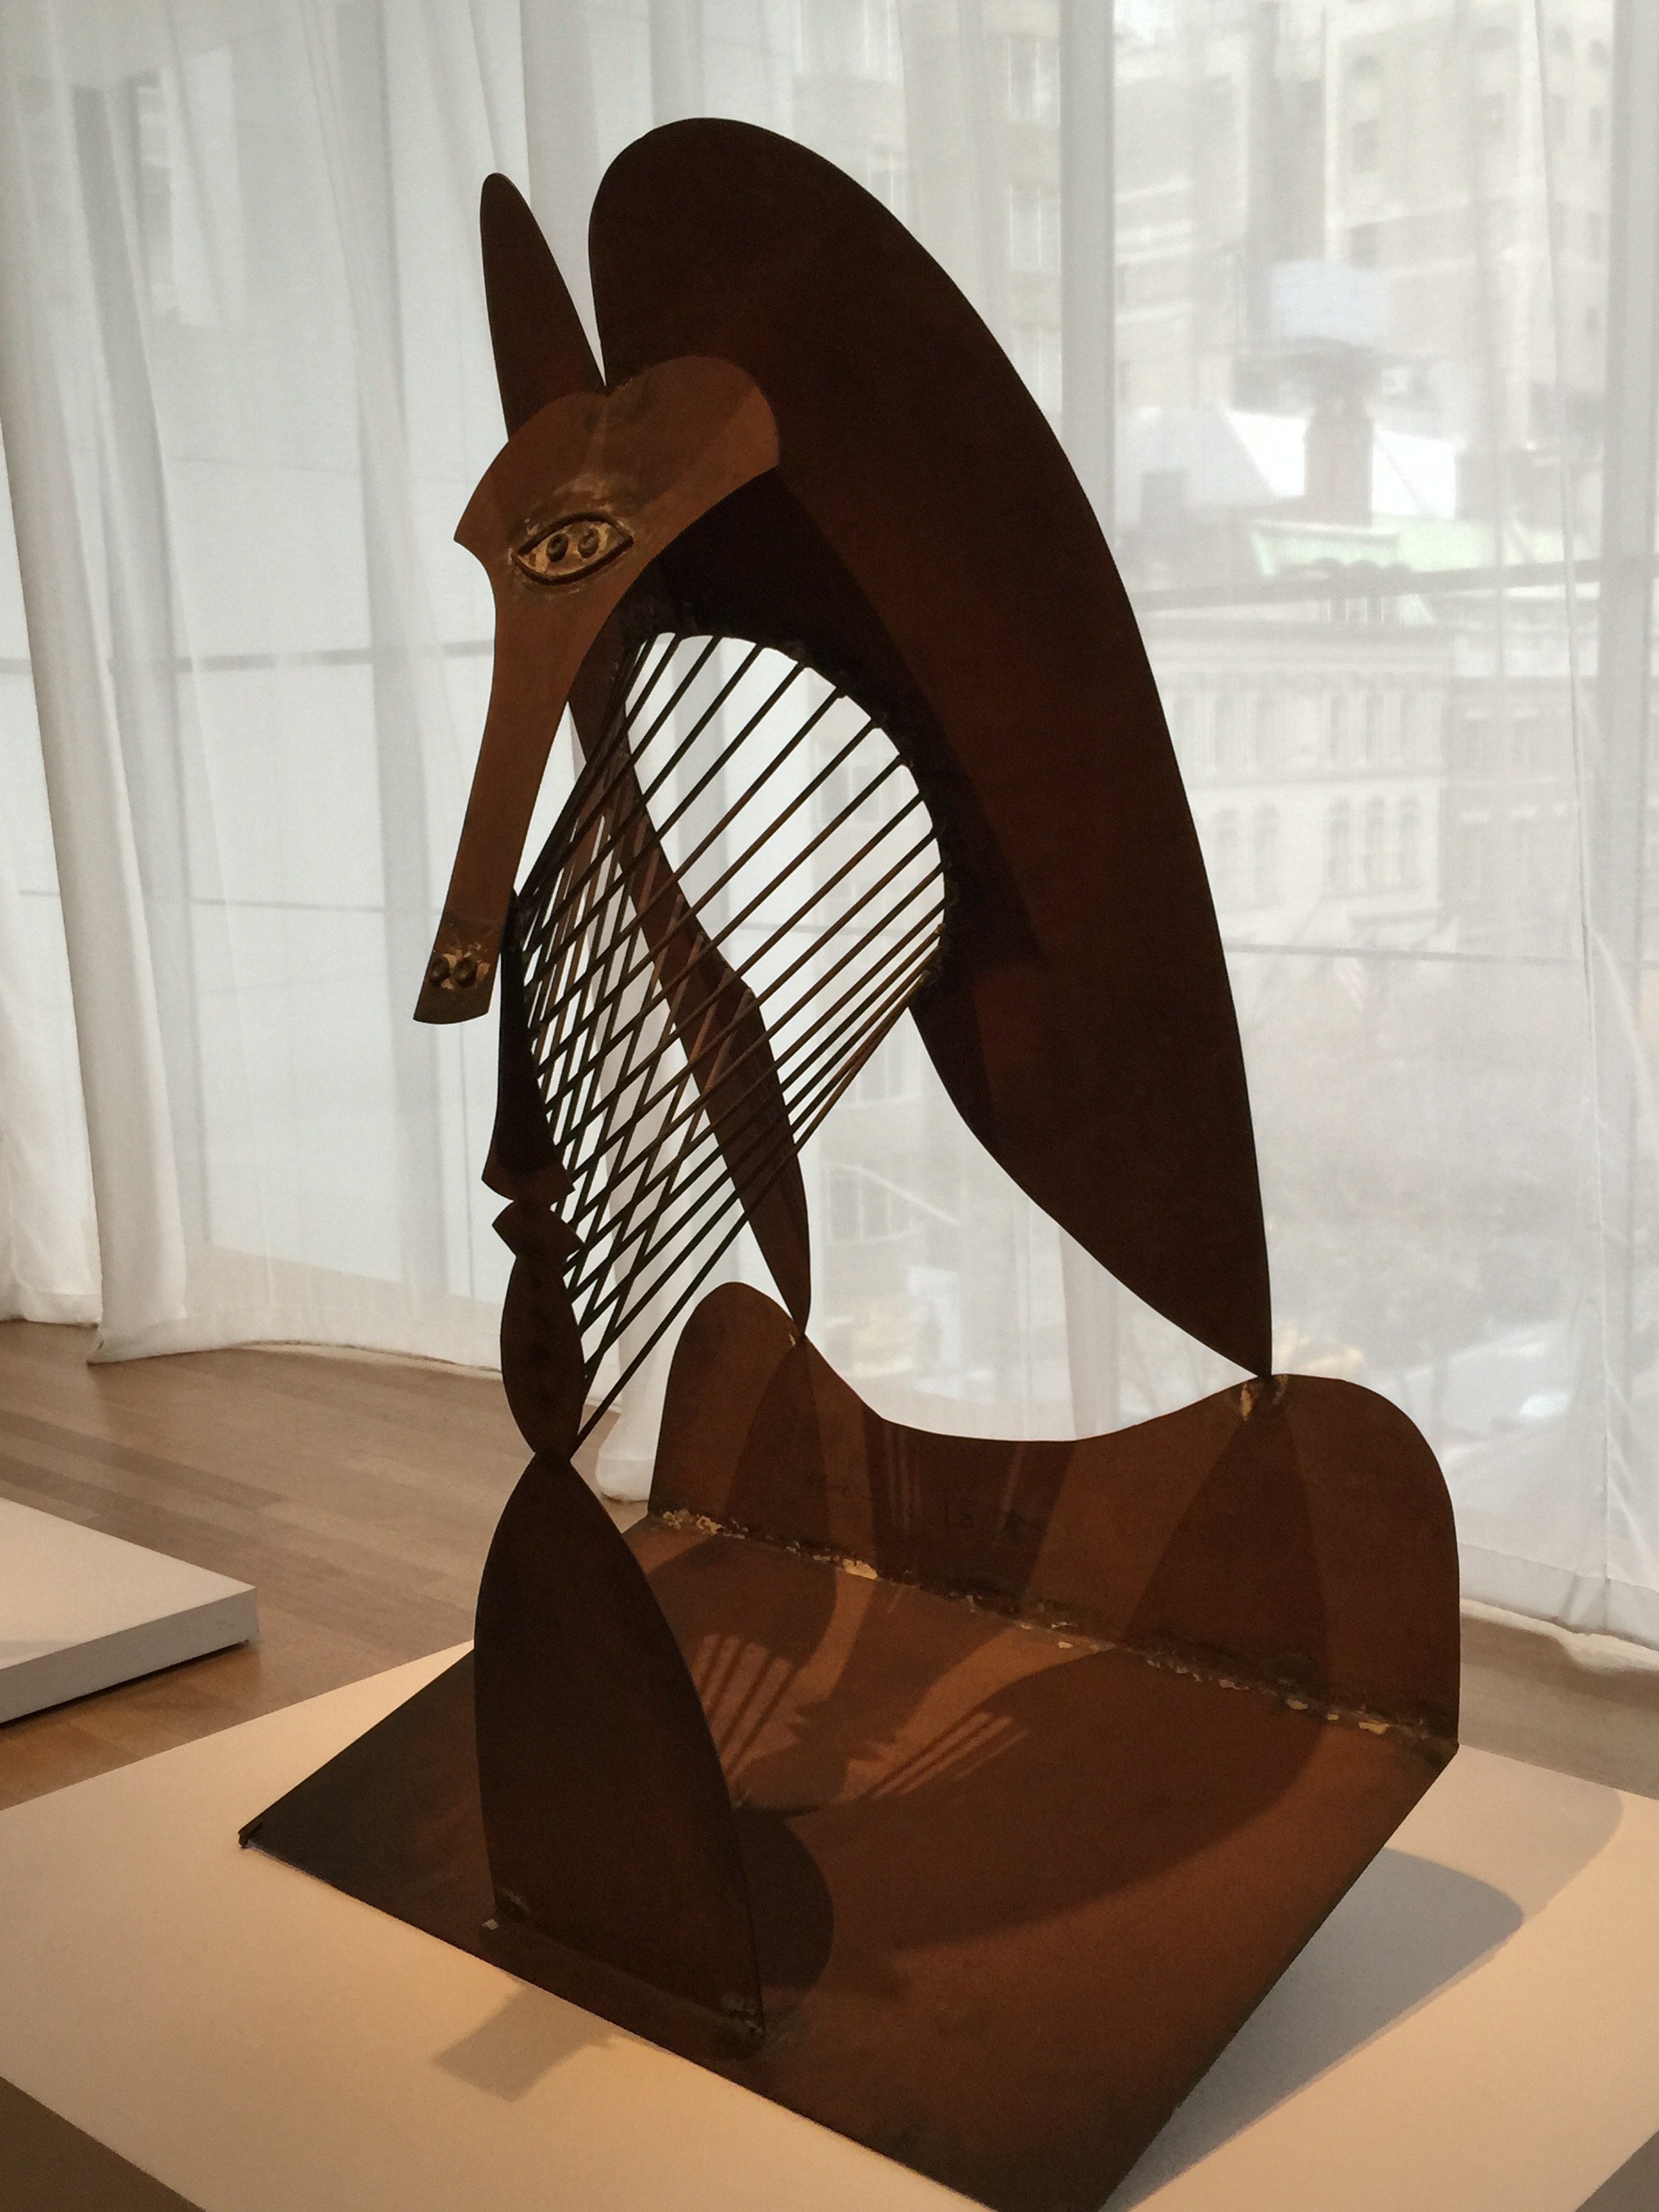 Picasso Sculpture at The MoMA